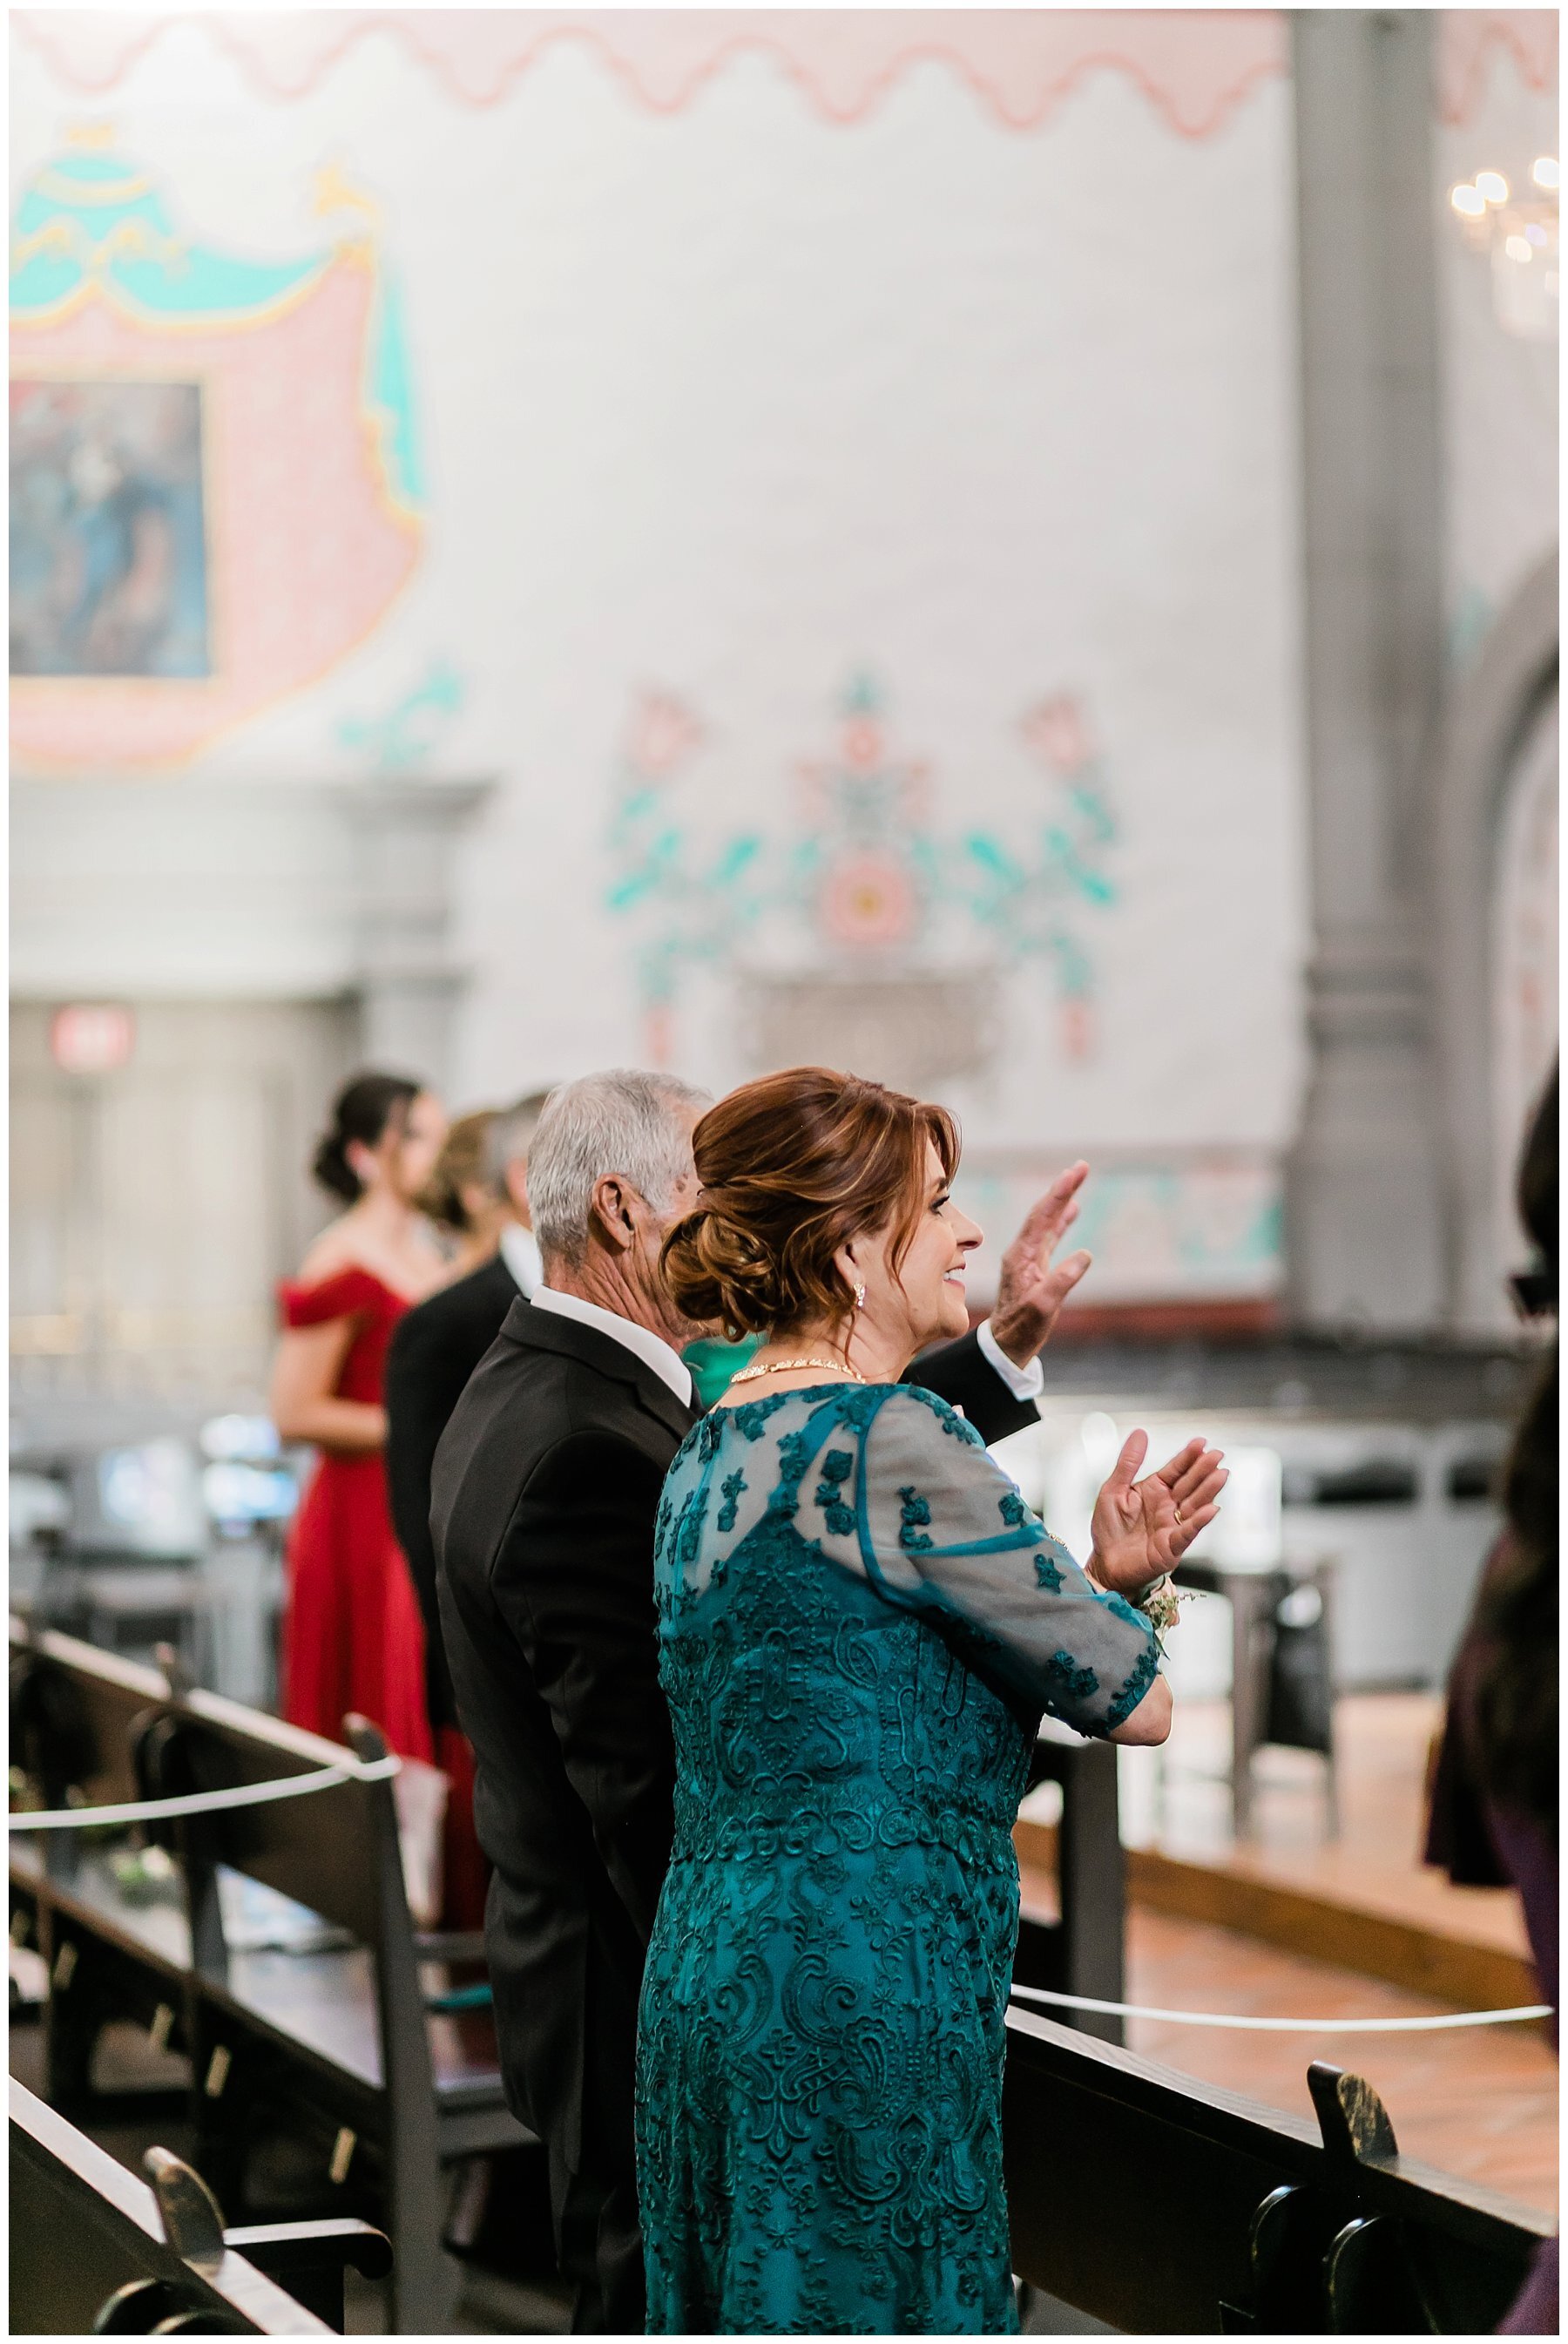  guests standing and applauding at the wedding ceremony 